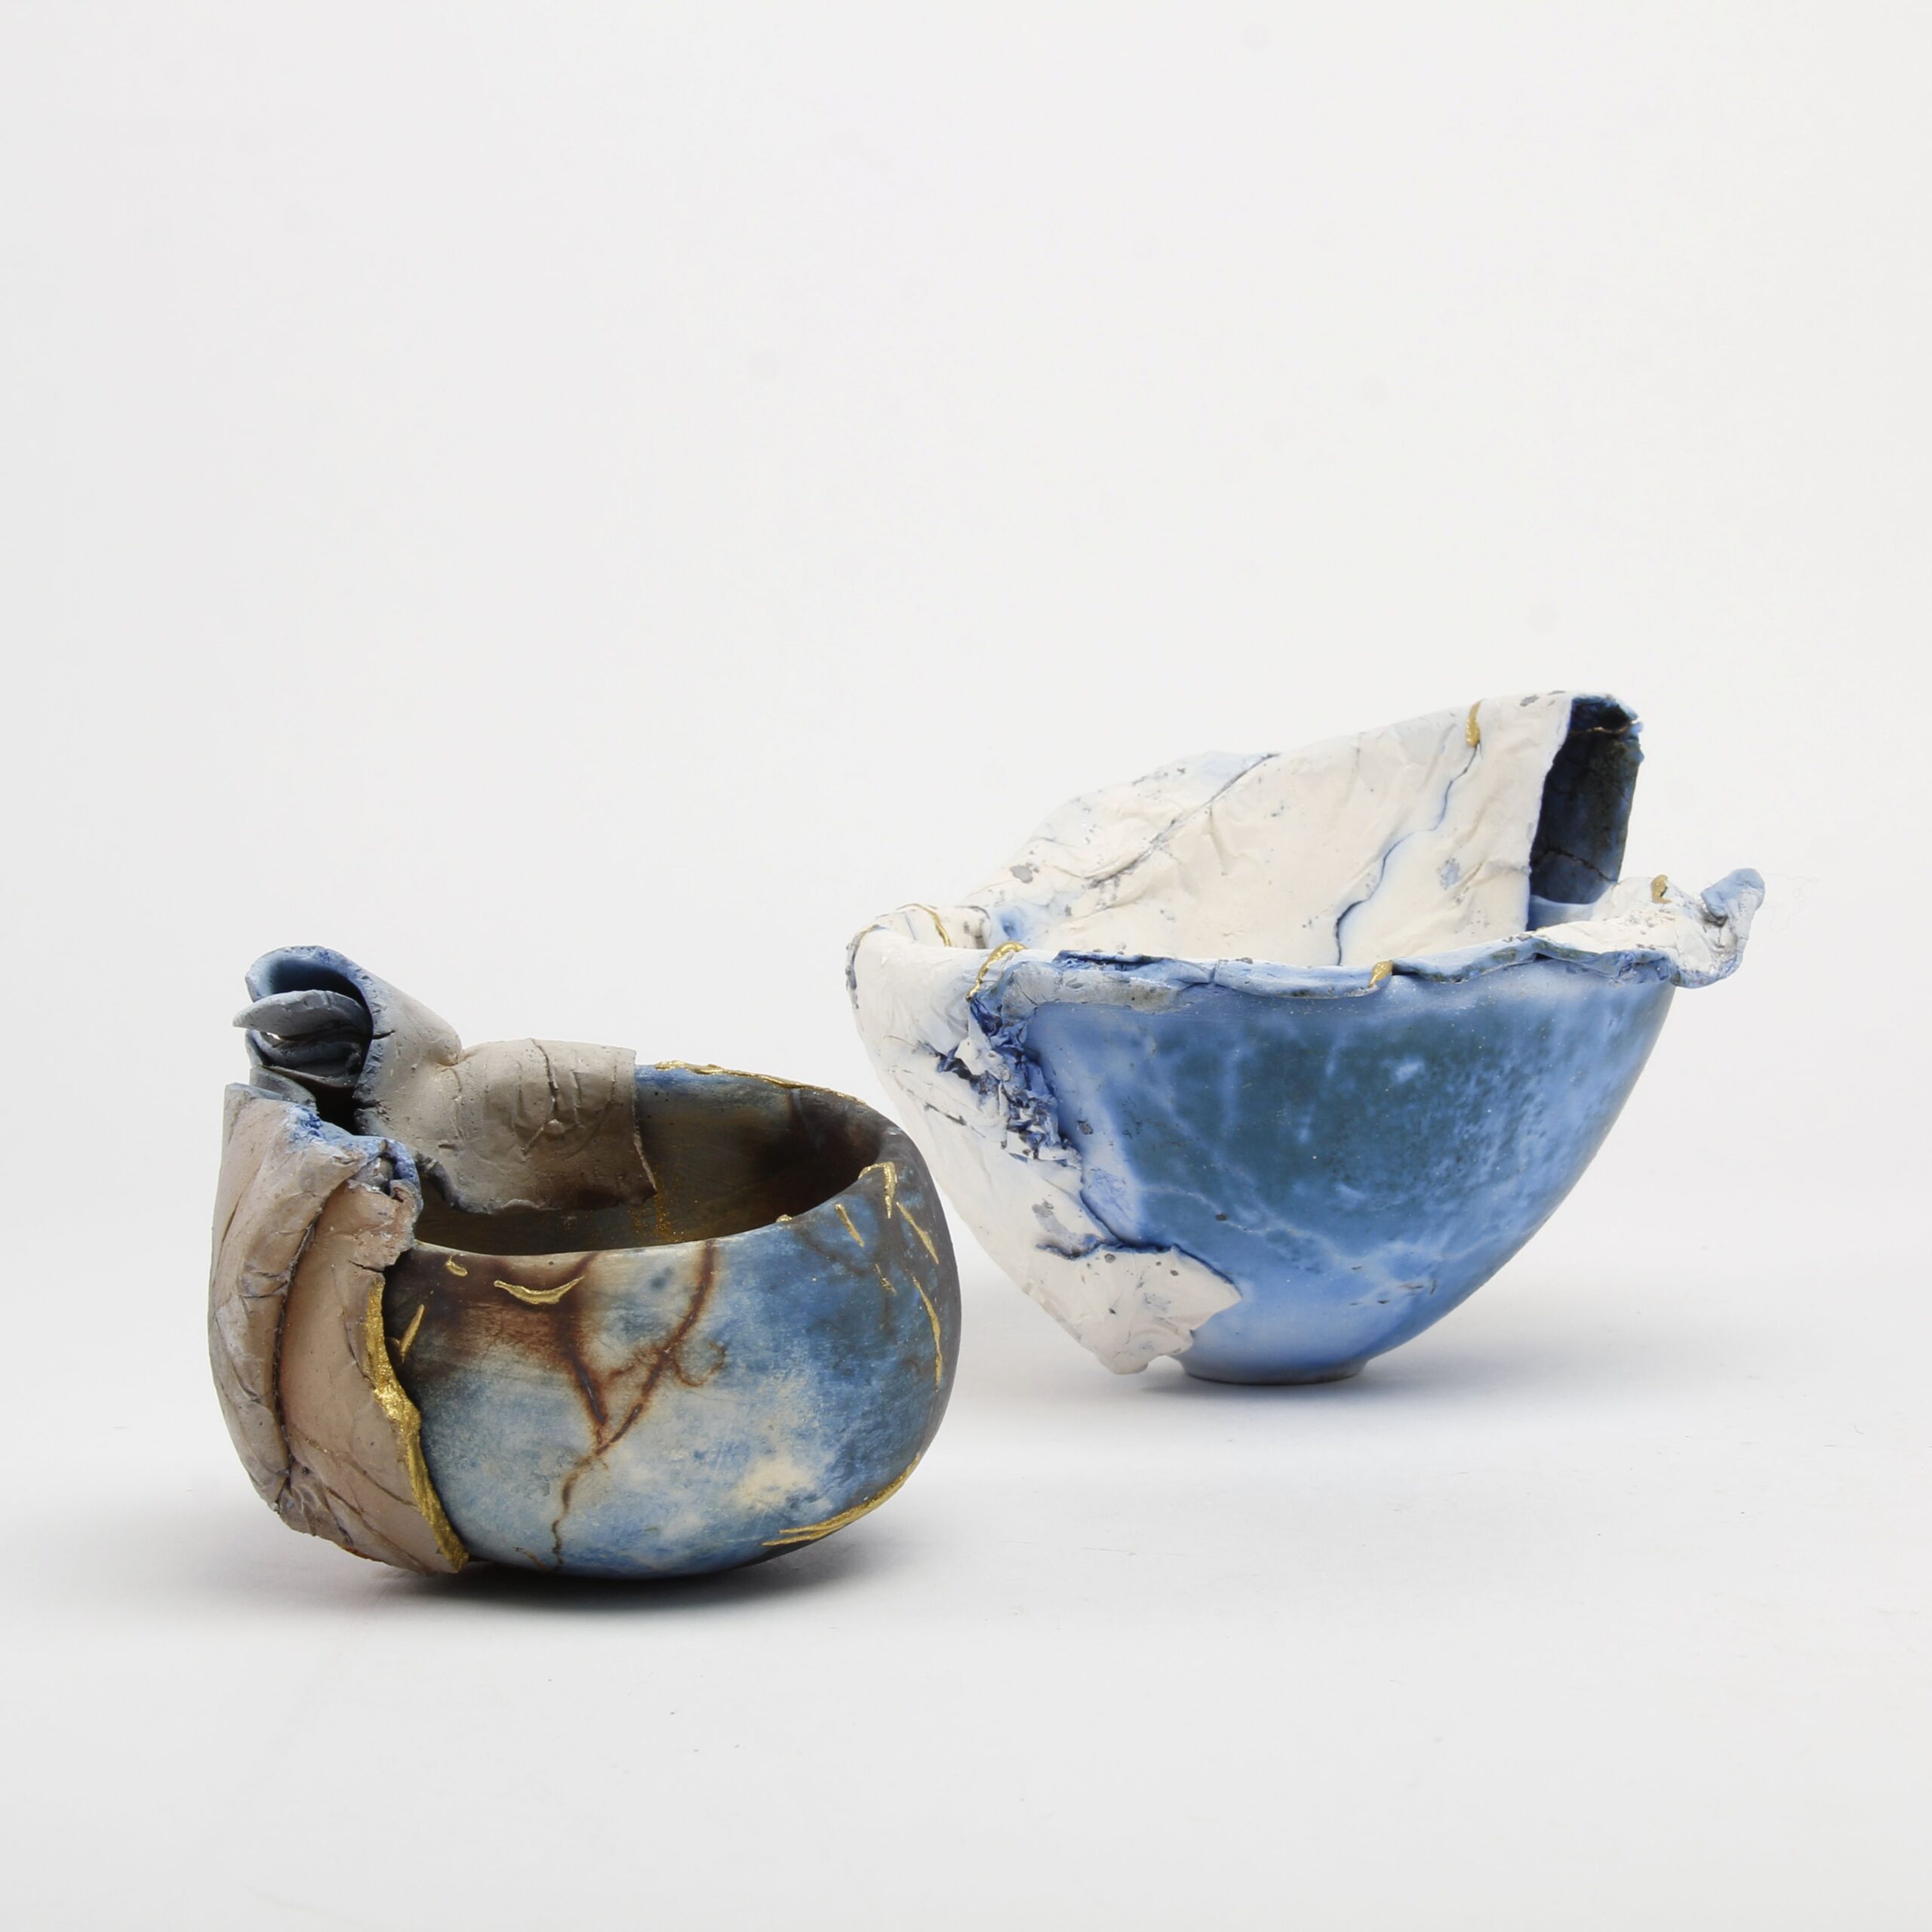 Alison Brannen: Shard cup Product Image 2 of 2